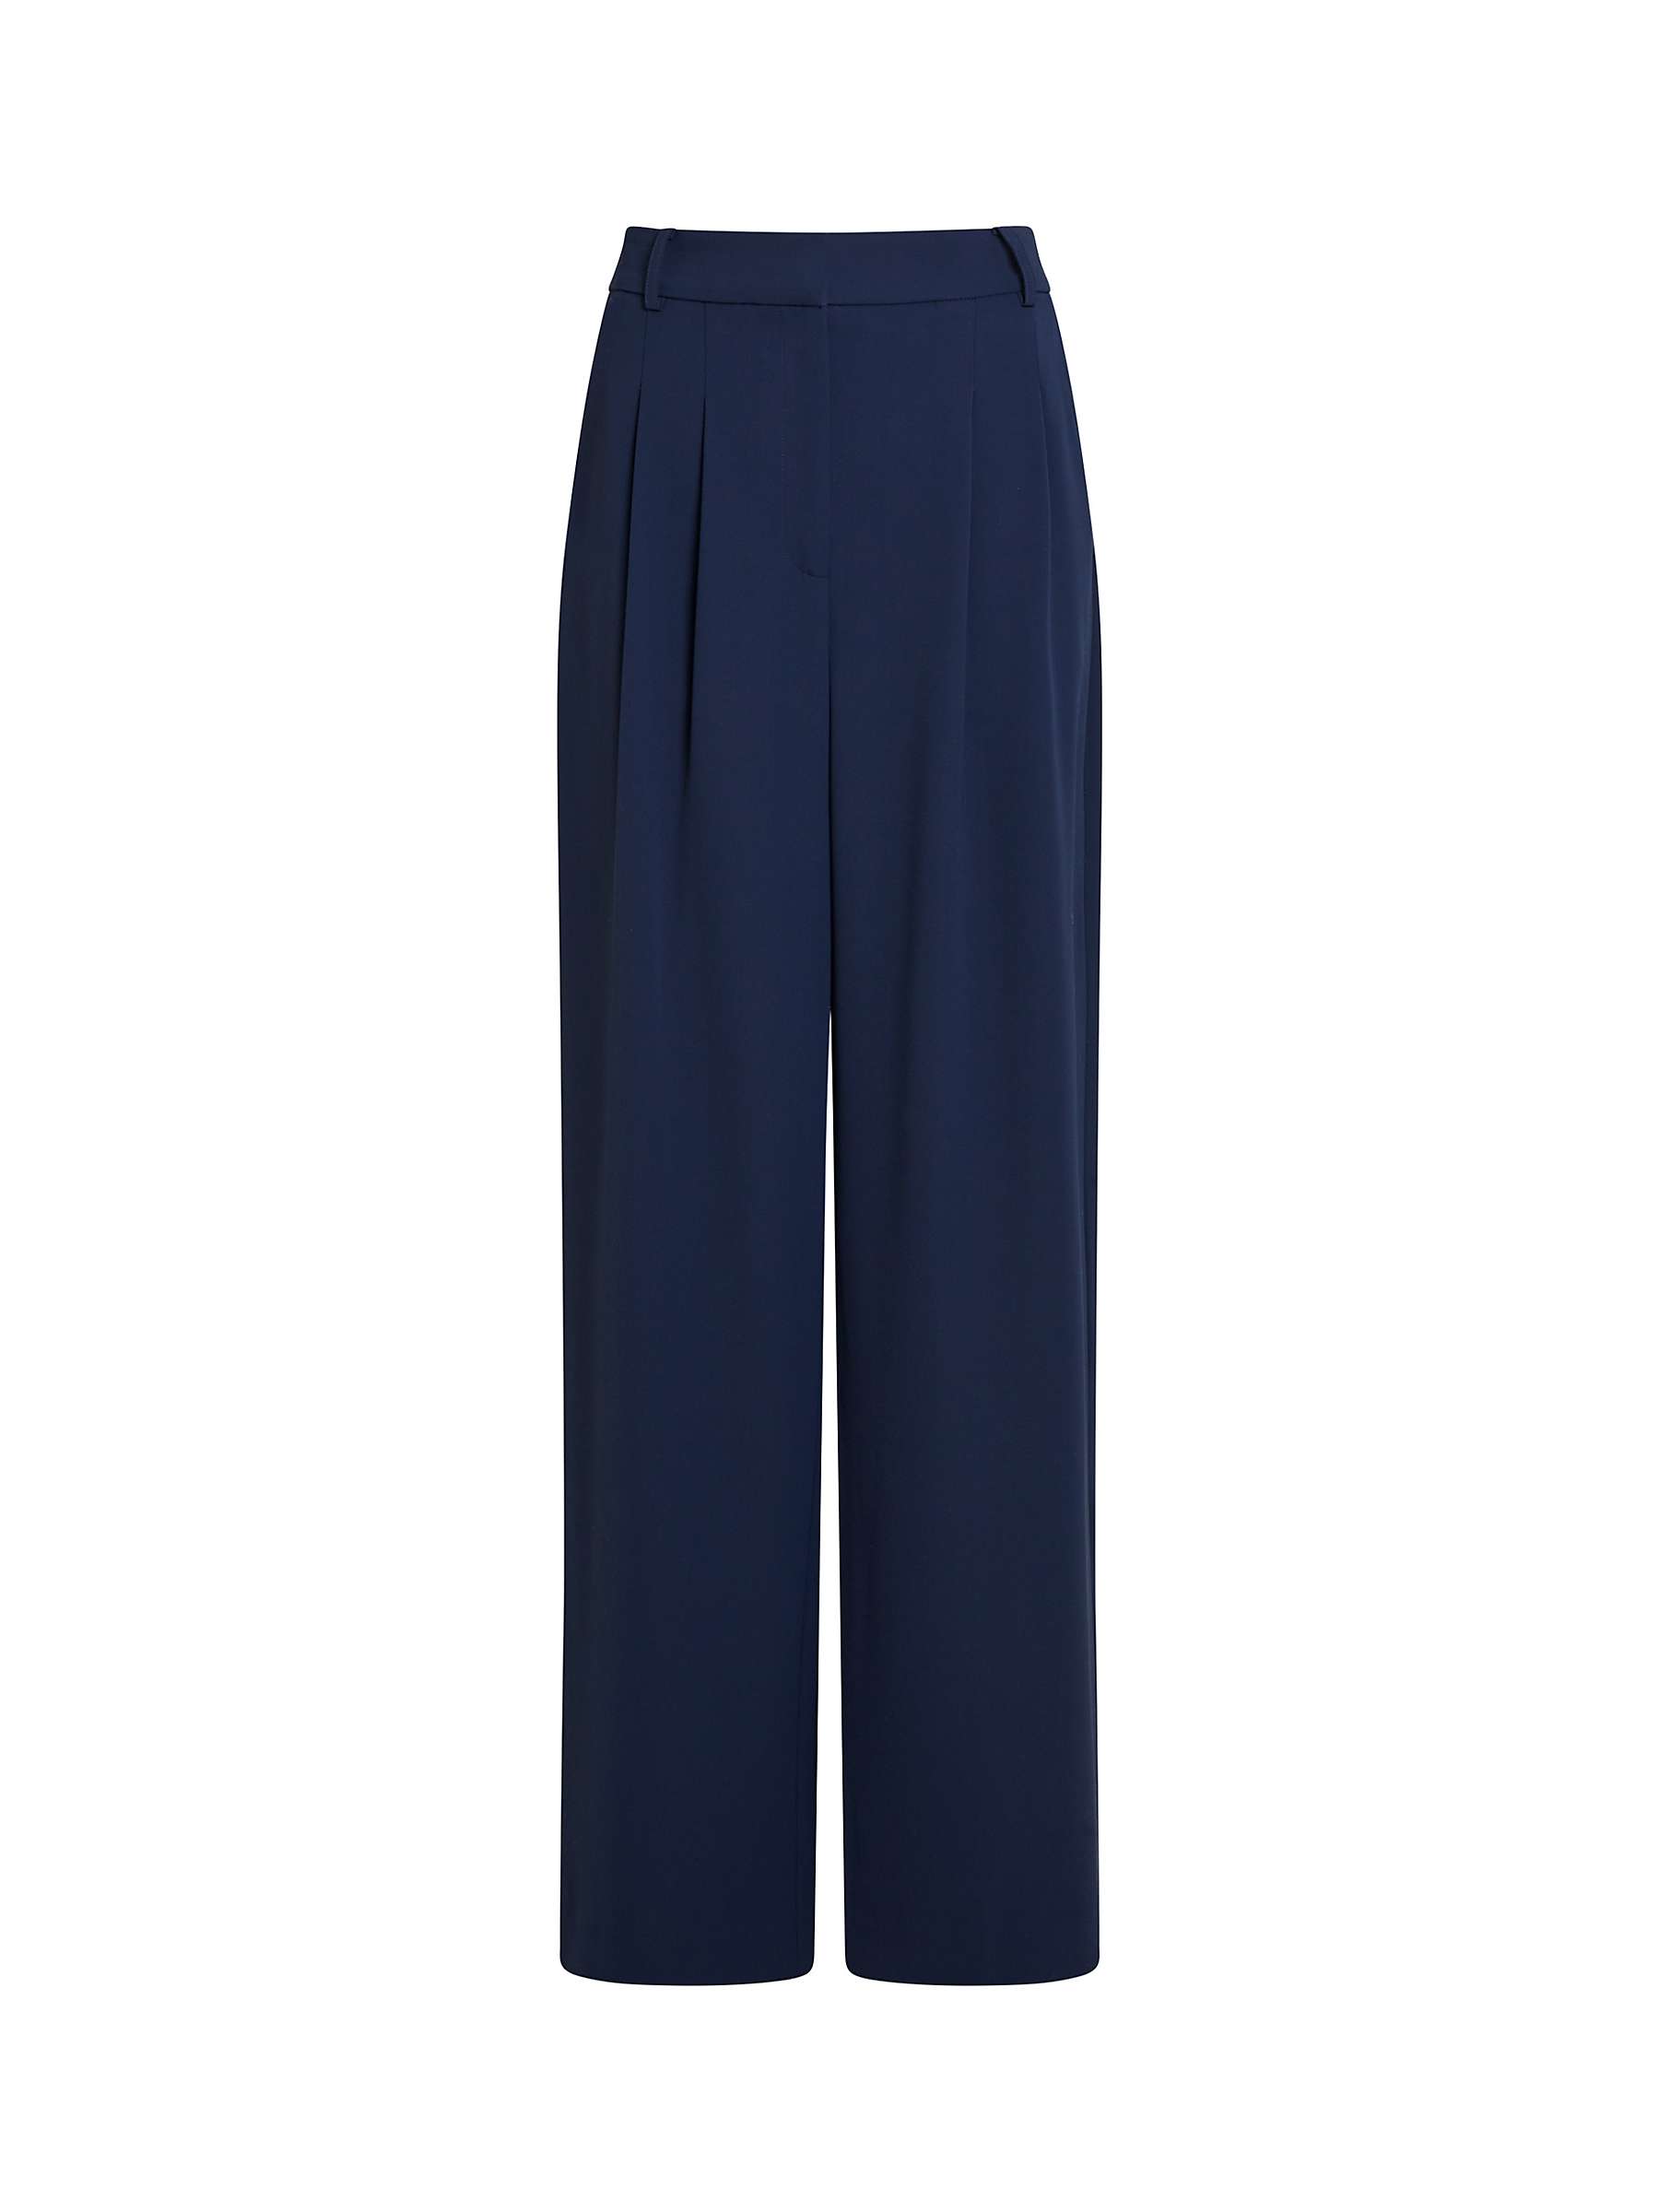 Buy French Connection Harry Wide Leg Trousers Online at johnlewis.com